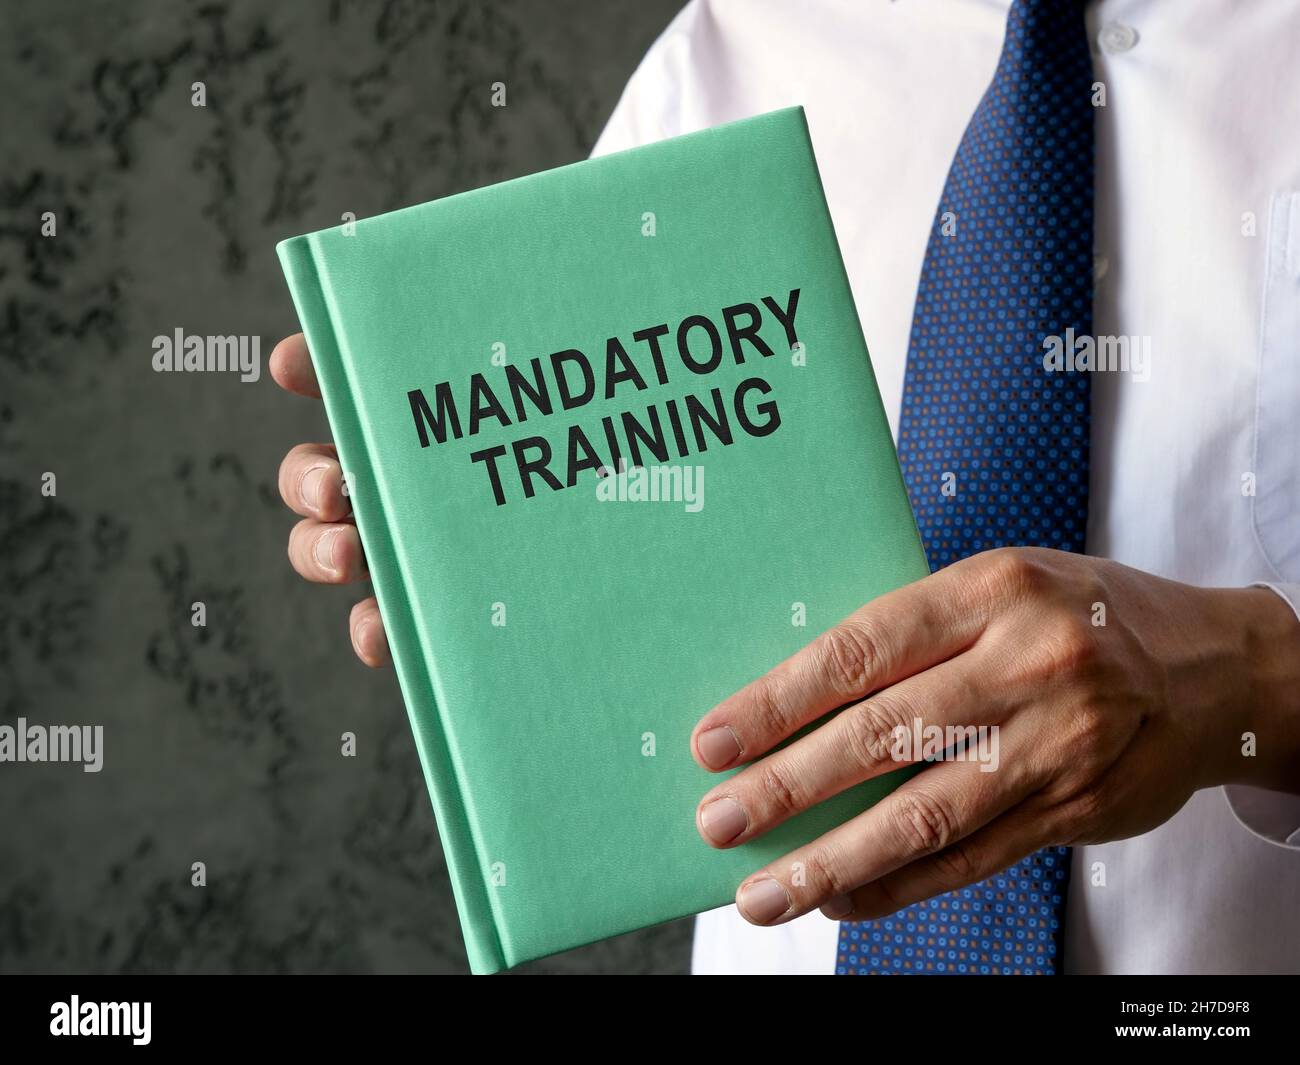 Employee holds mandatory training guide in the hands. Stock Photo